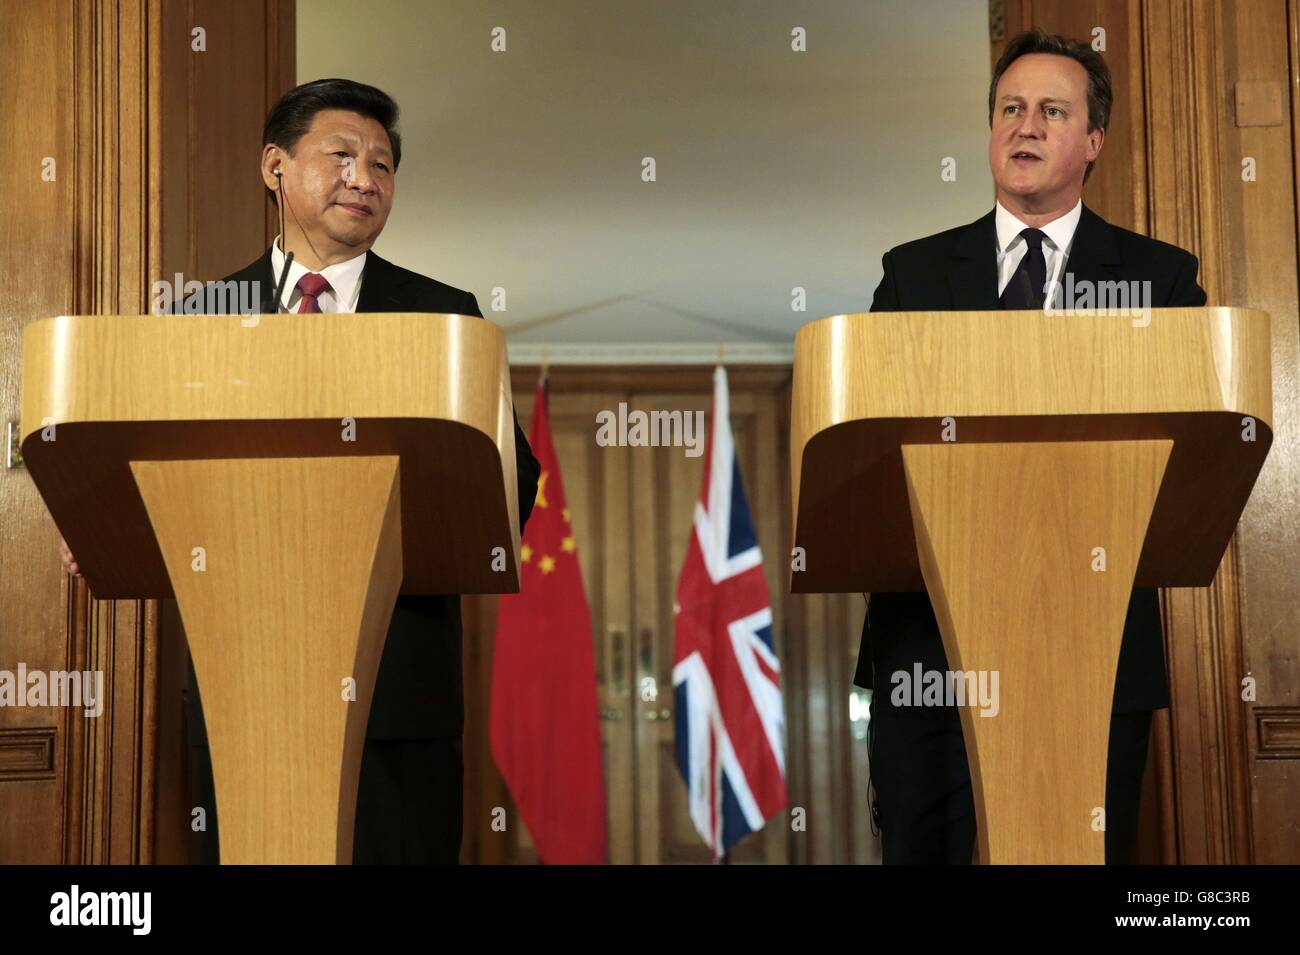 China's President Xi Jinping and Prime Minister David Cameron attend a joint press conference in 10 Downing Street, in central London on the second day of his state visit to the UK. Stock Photo